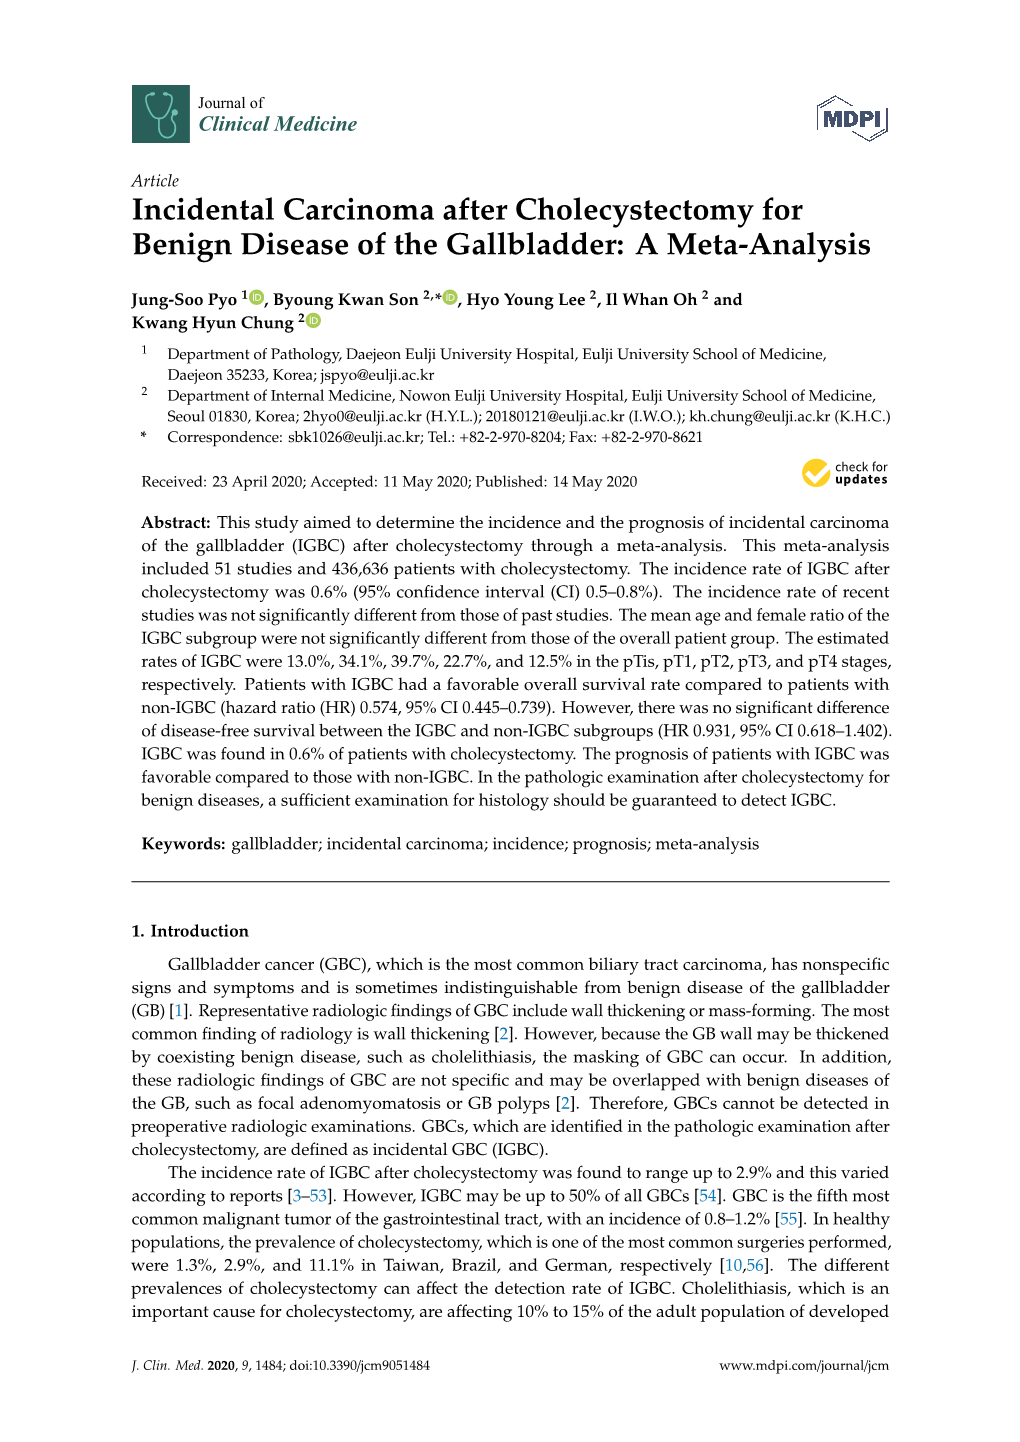 Incidental Carcinoma After Cholecystectomy for Benign Disease of the Gallbladder: a Meta-Analysis